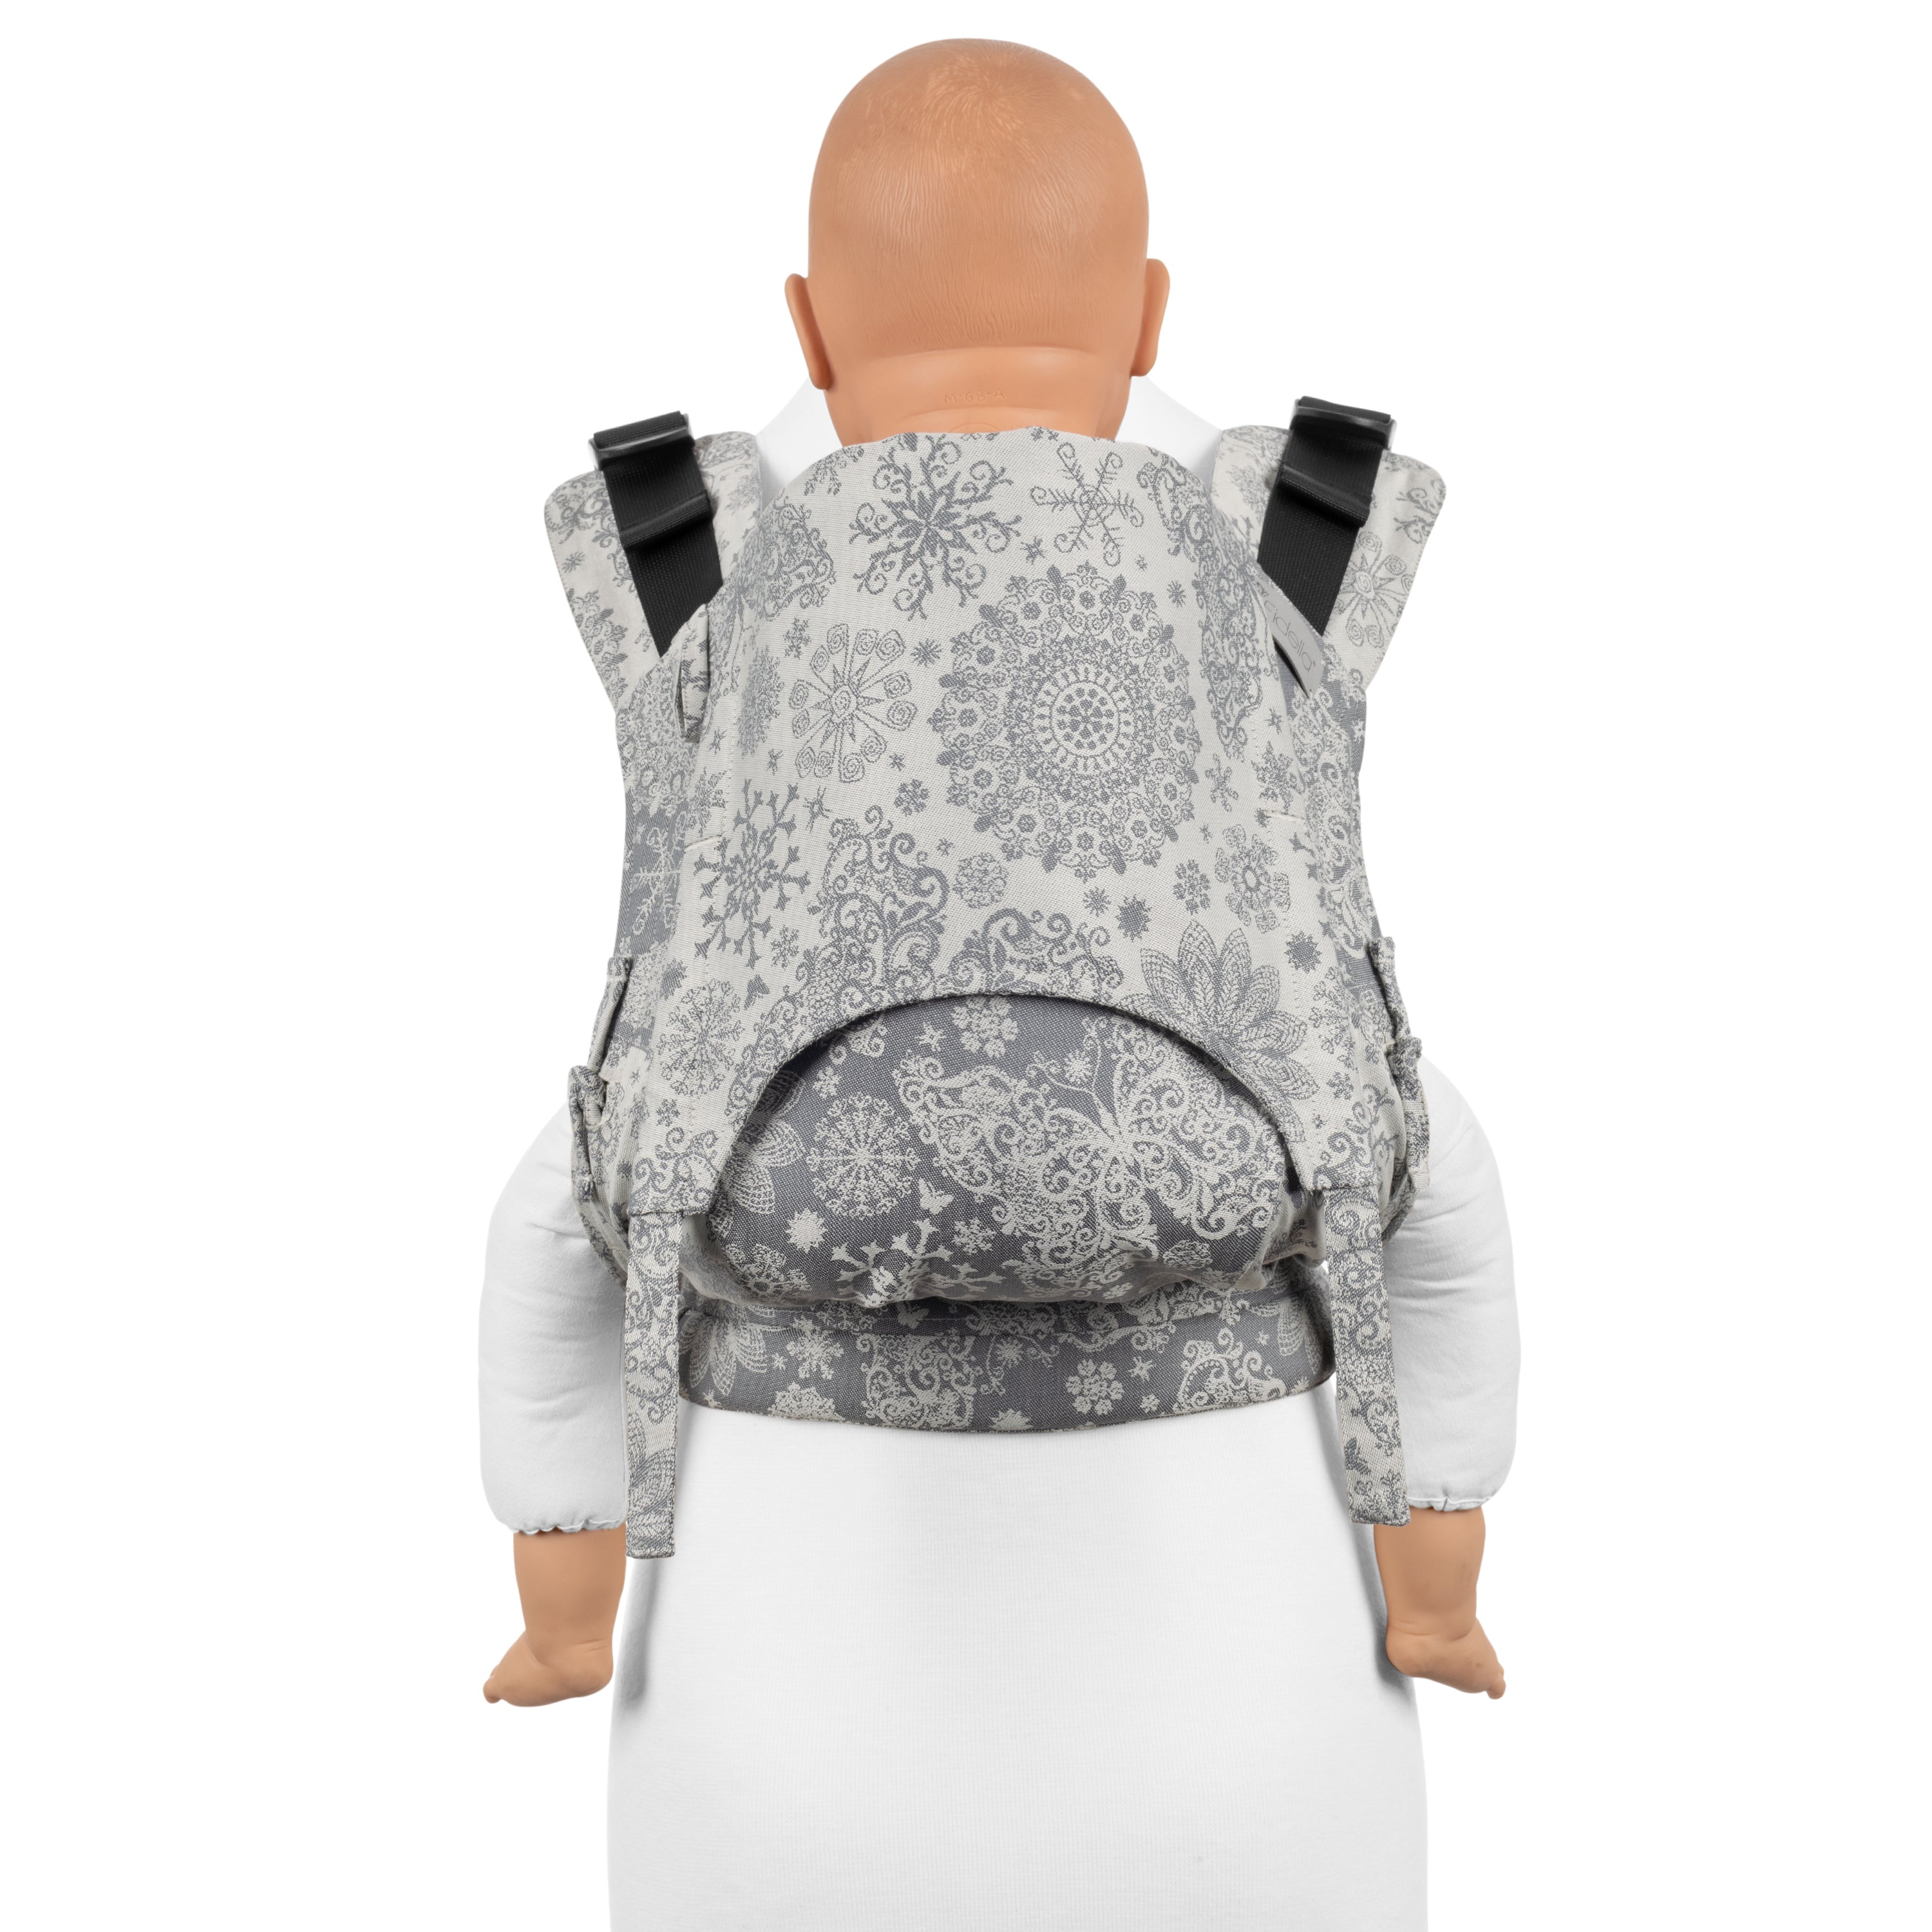 Fullbuckle Baby Carrier | Fidella® Fusion | Iced Butterfly - smoke